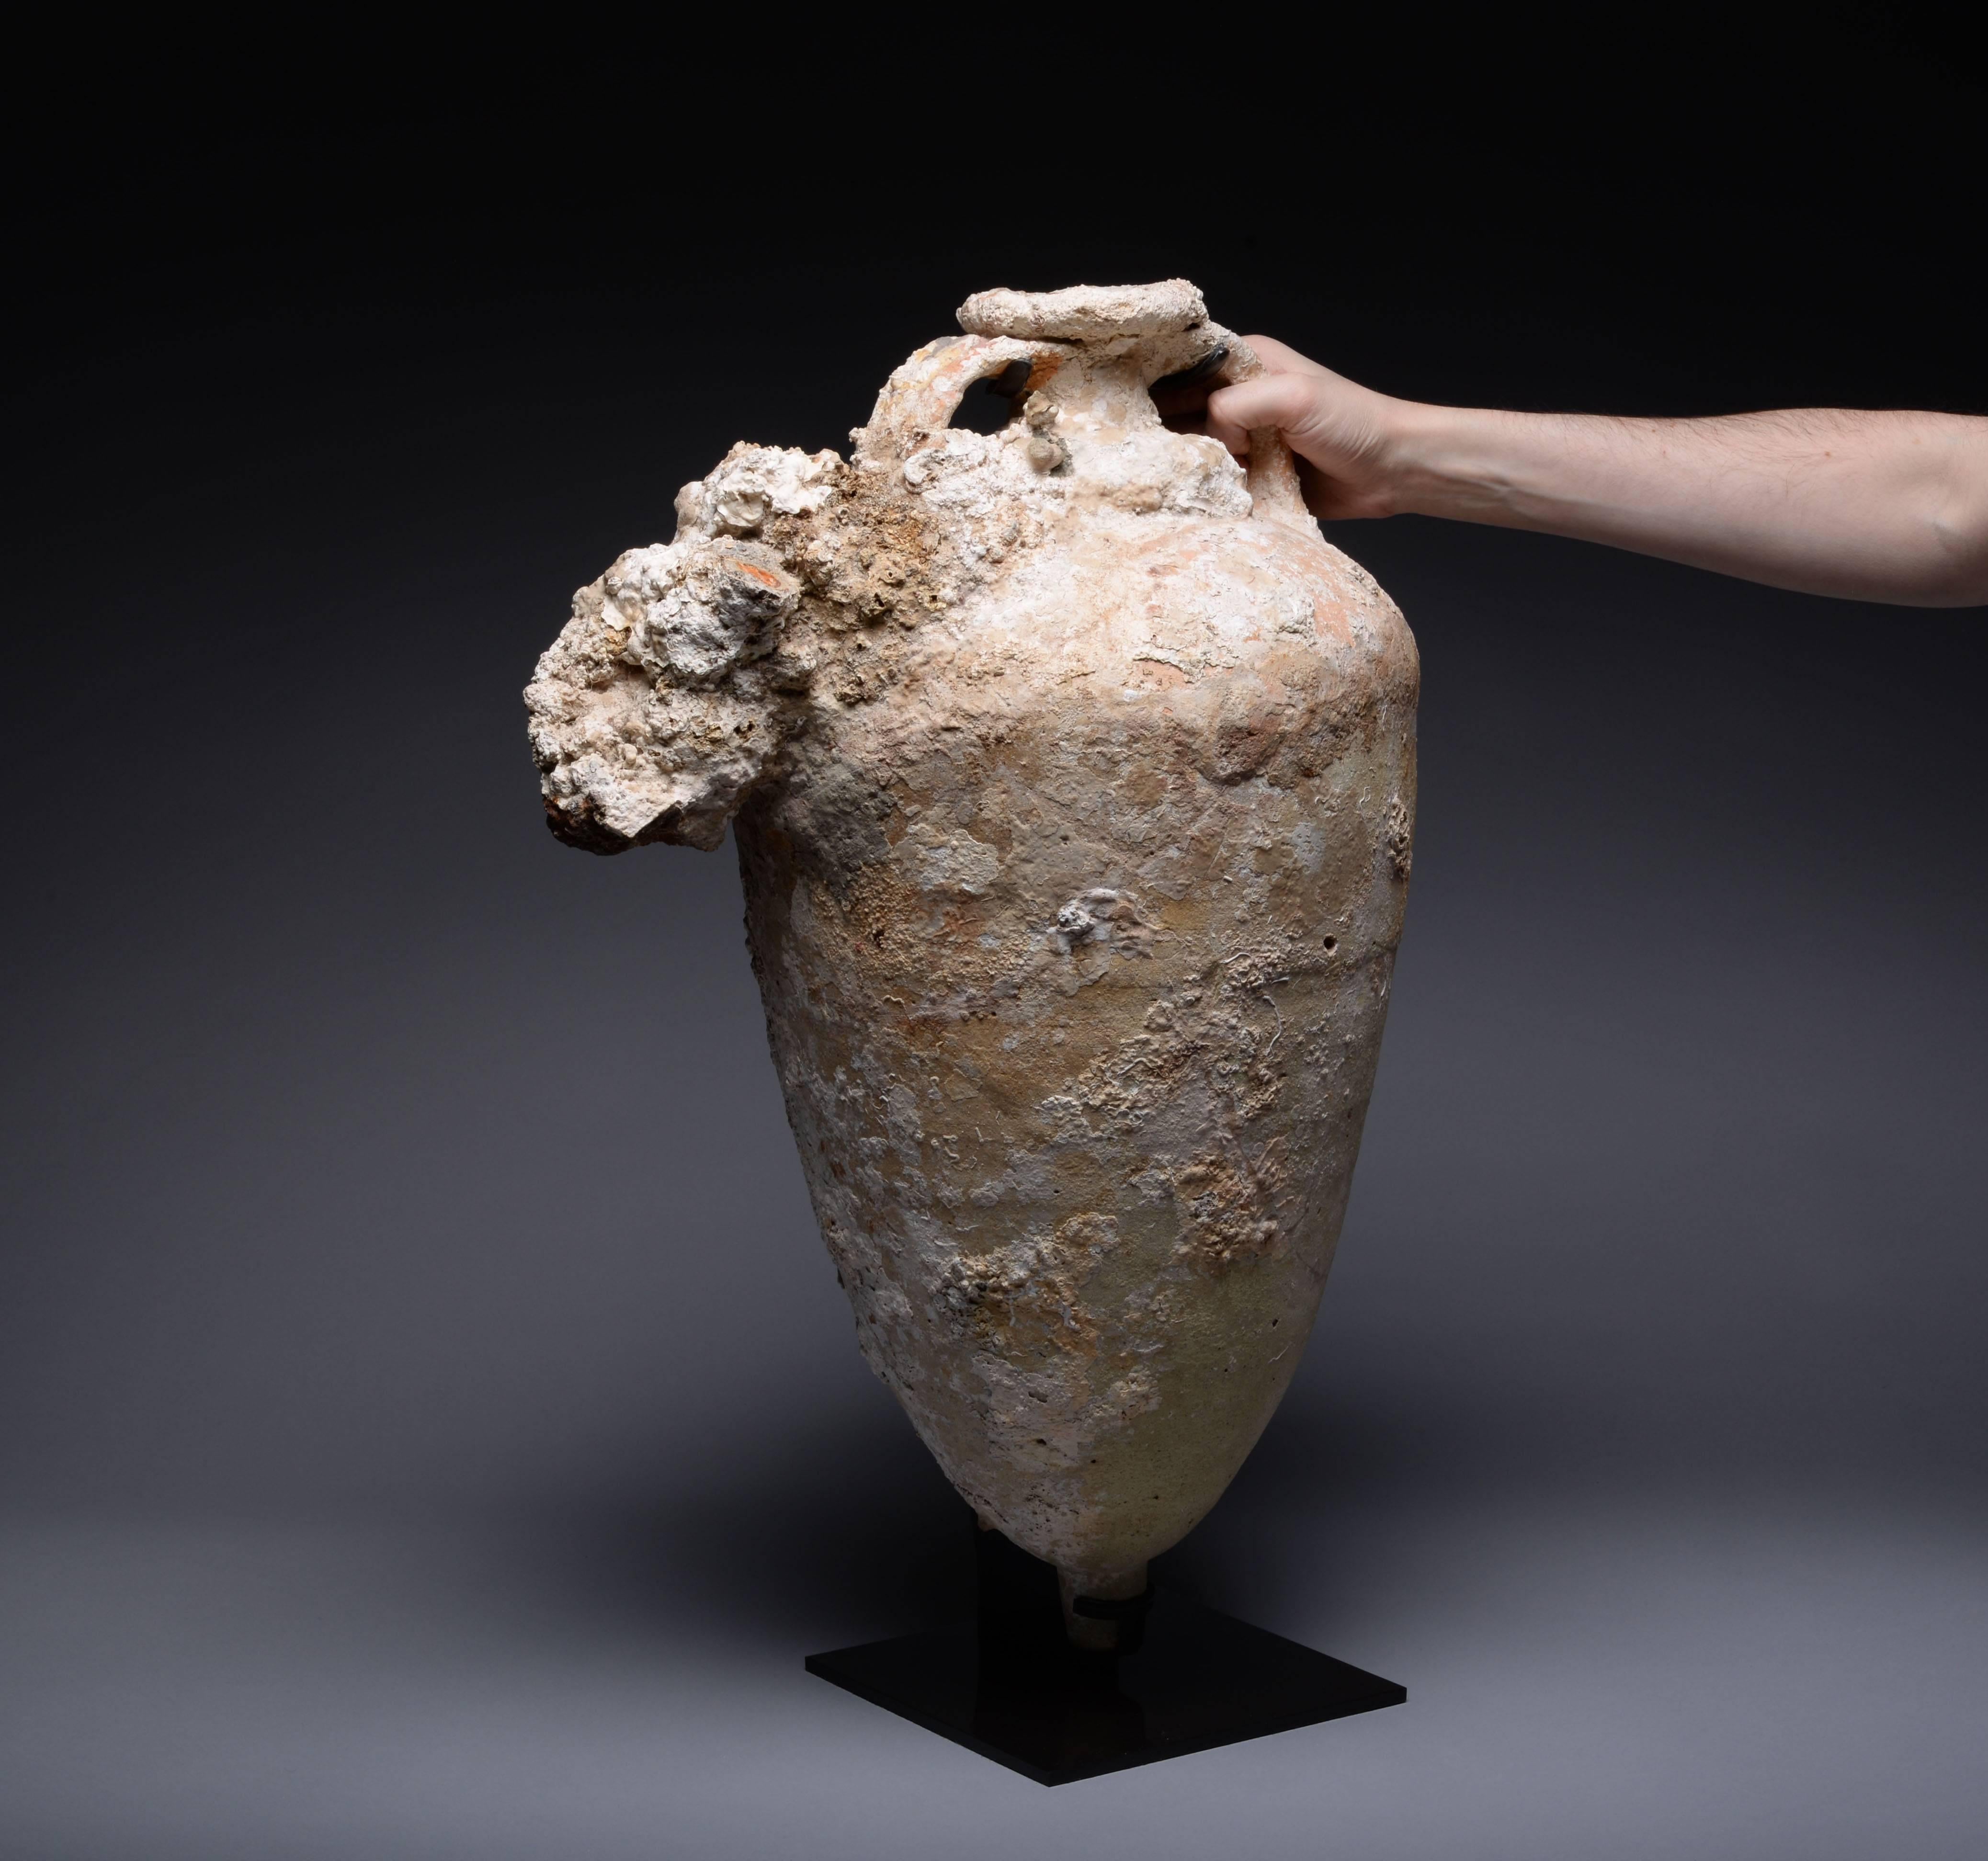 A large and beautifully encrusted ancient Roman transport Amphora, sea salvaged and dating to circa 100 AD.

Salvaged from the depths of the Mediterranean, this large vessel was lost in some ancient shipwreck. Once filled with the produce of the